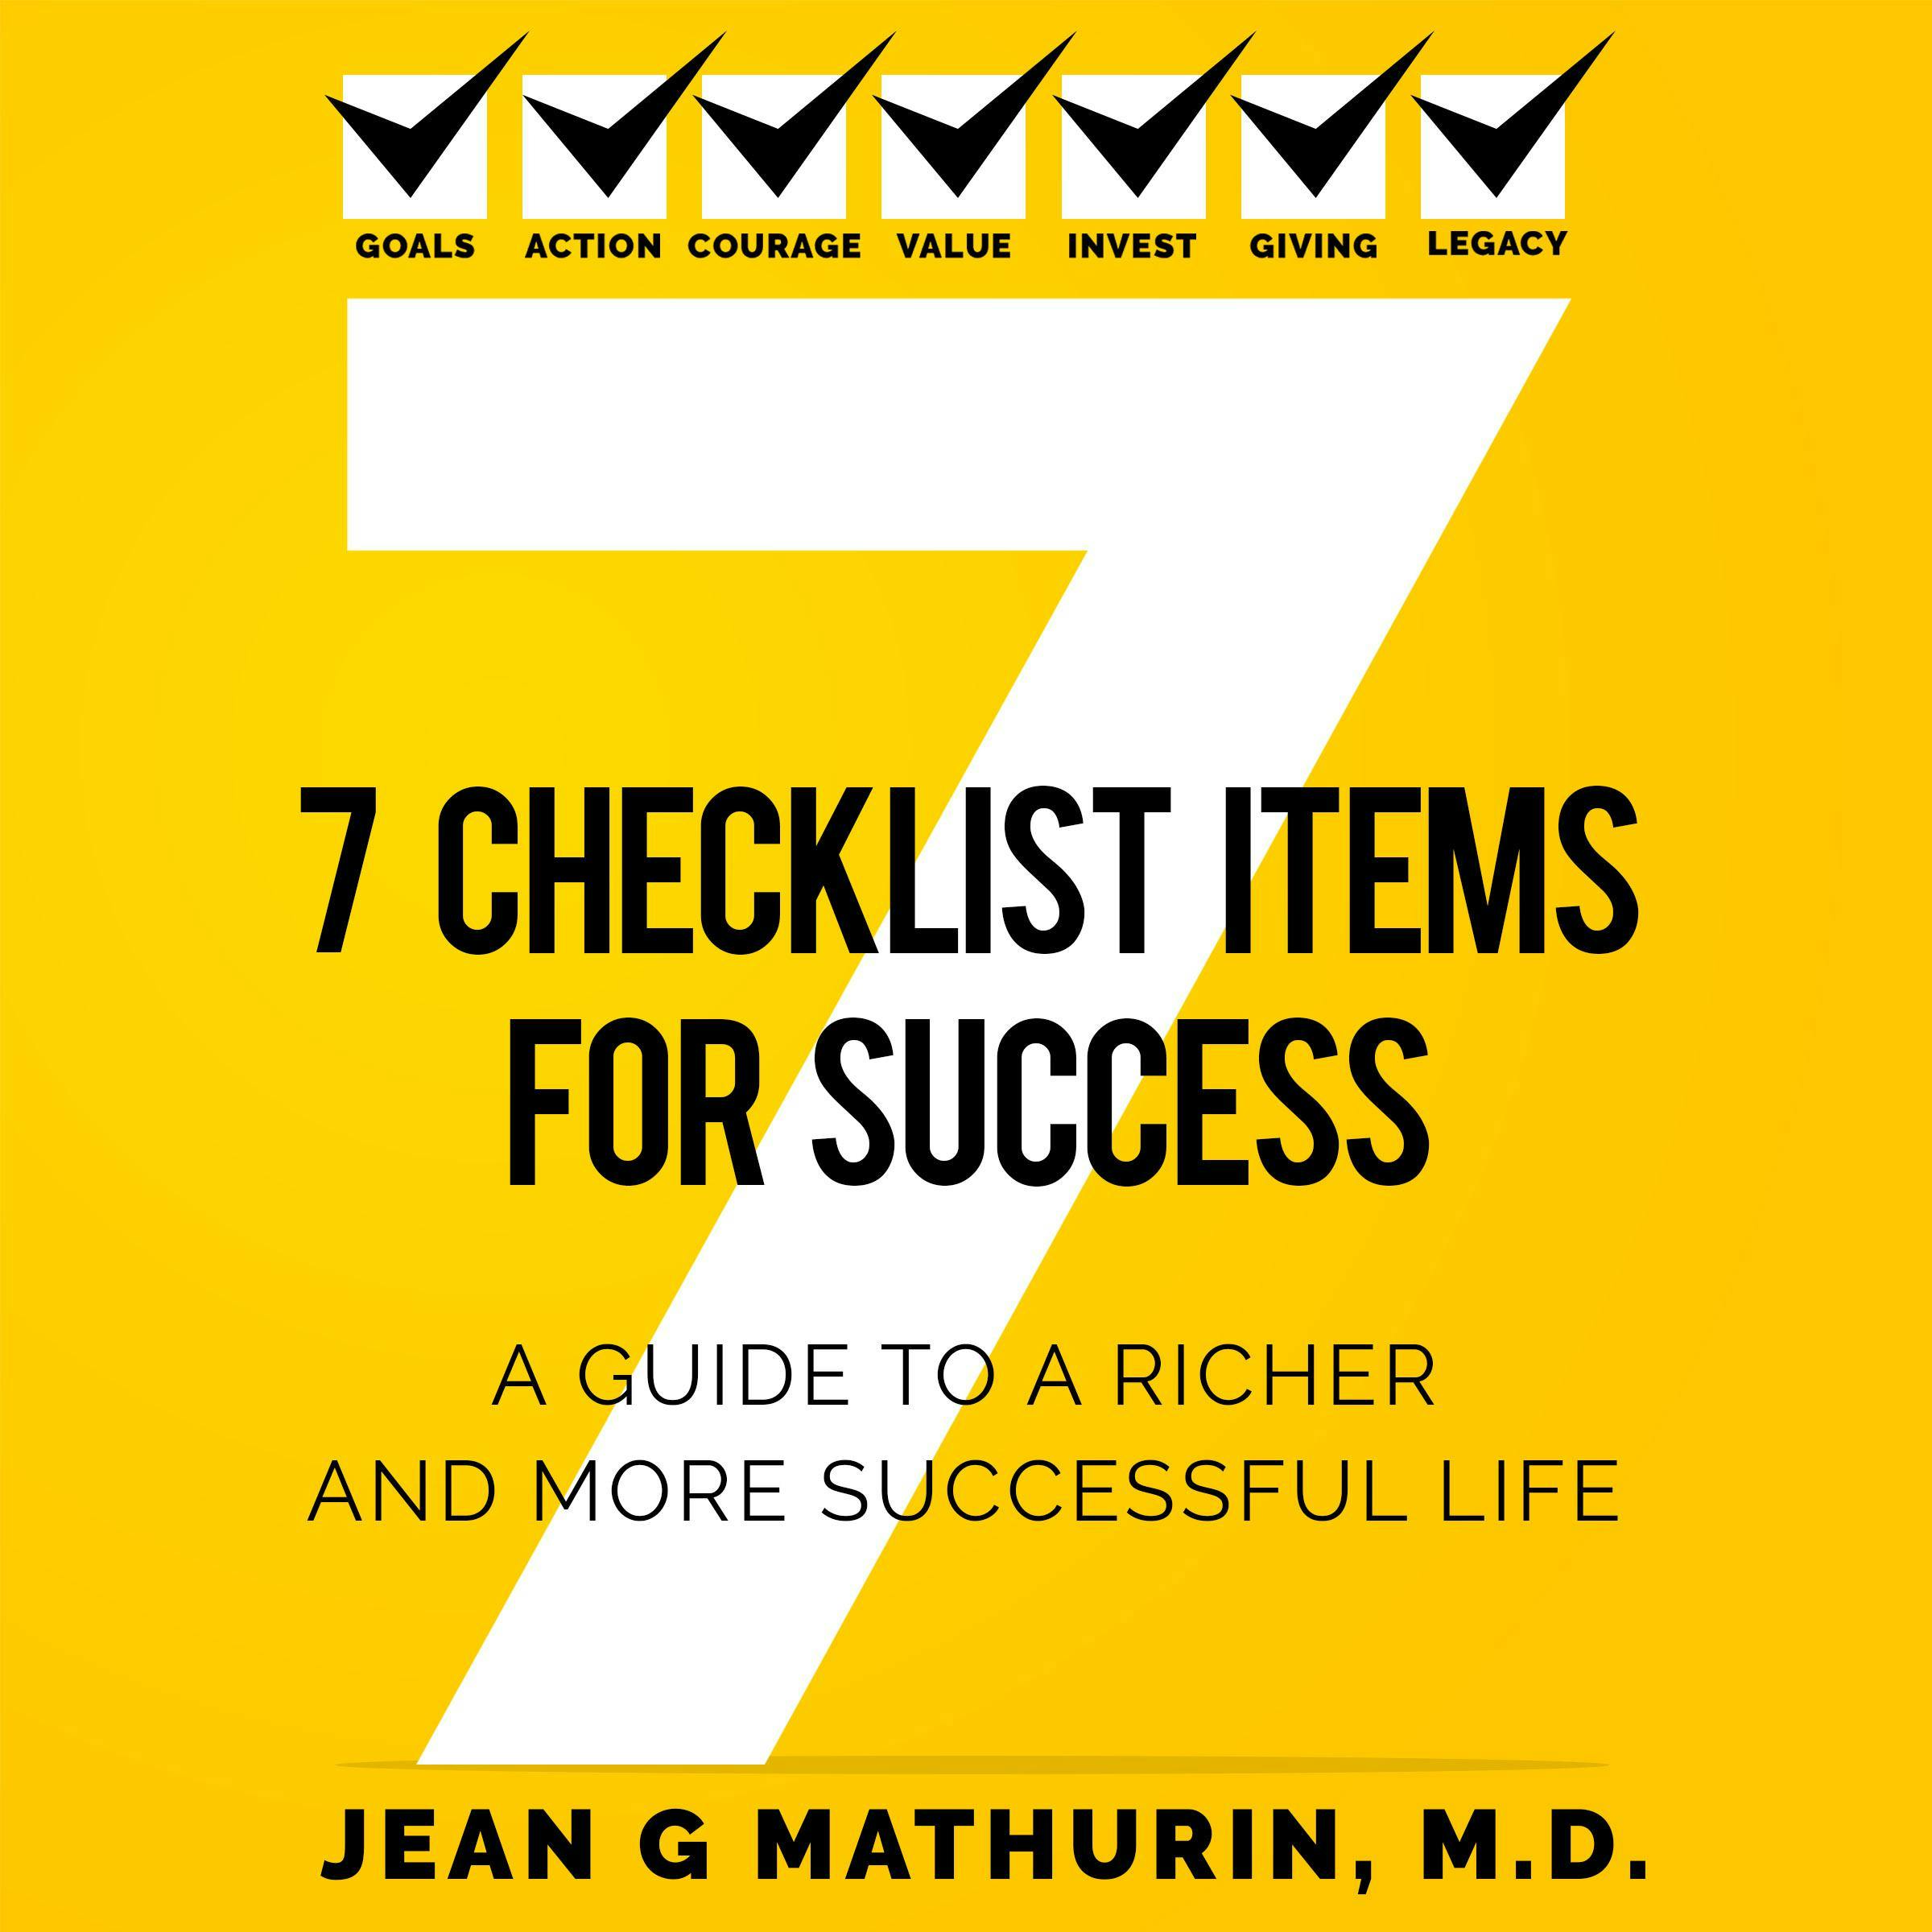 7 CHECKLIST ITEMS FOR SUCCESS: A GUIDE TO A RICHER AND MORE SUCCESSFUL LIFE - undefined